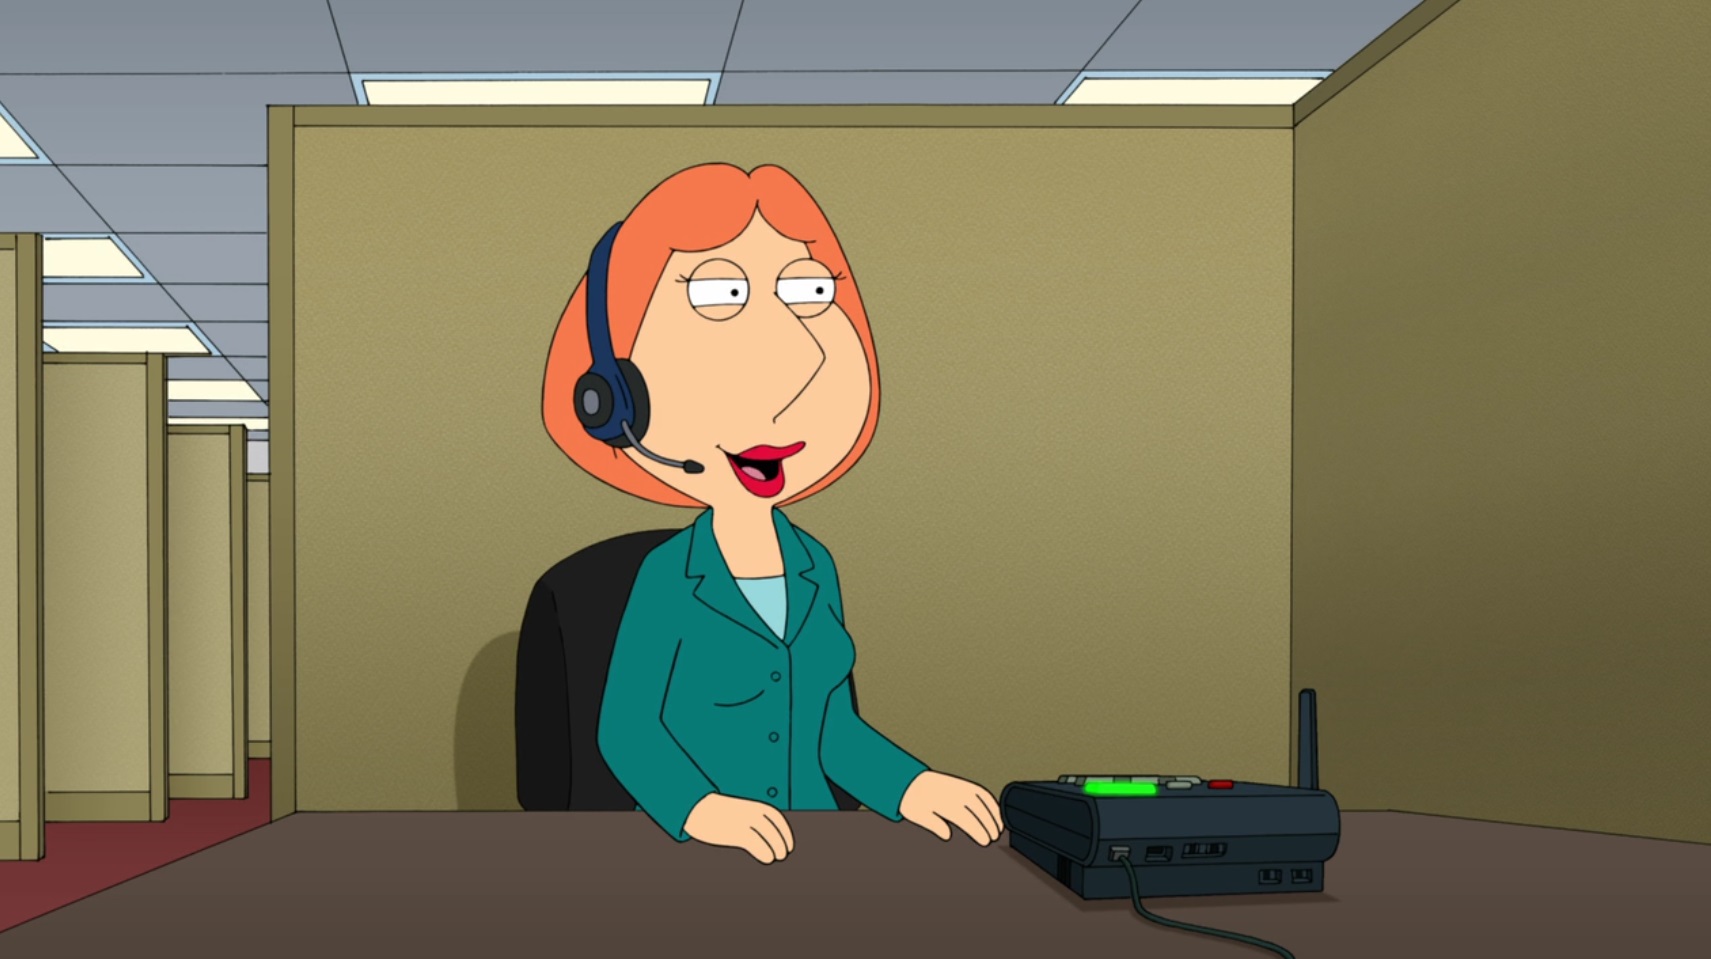 dale ballantyne recommends lois griffin naked game pic